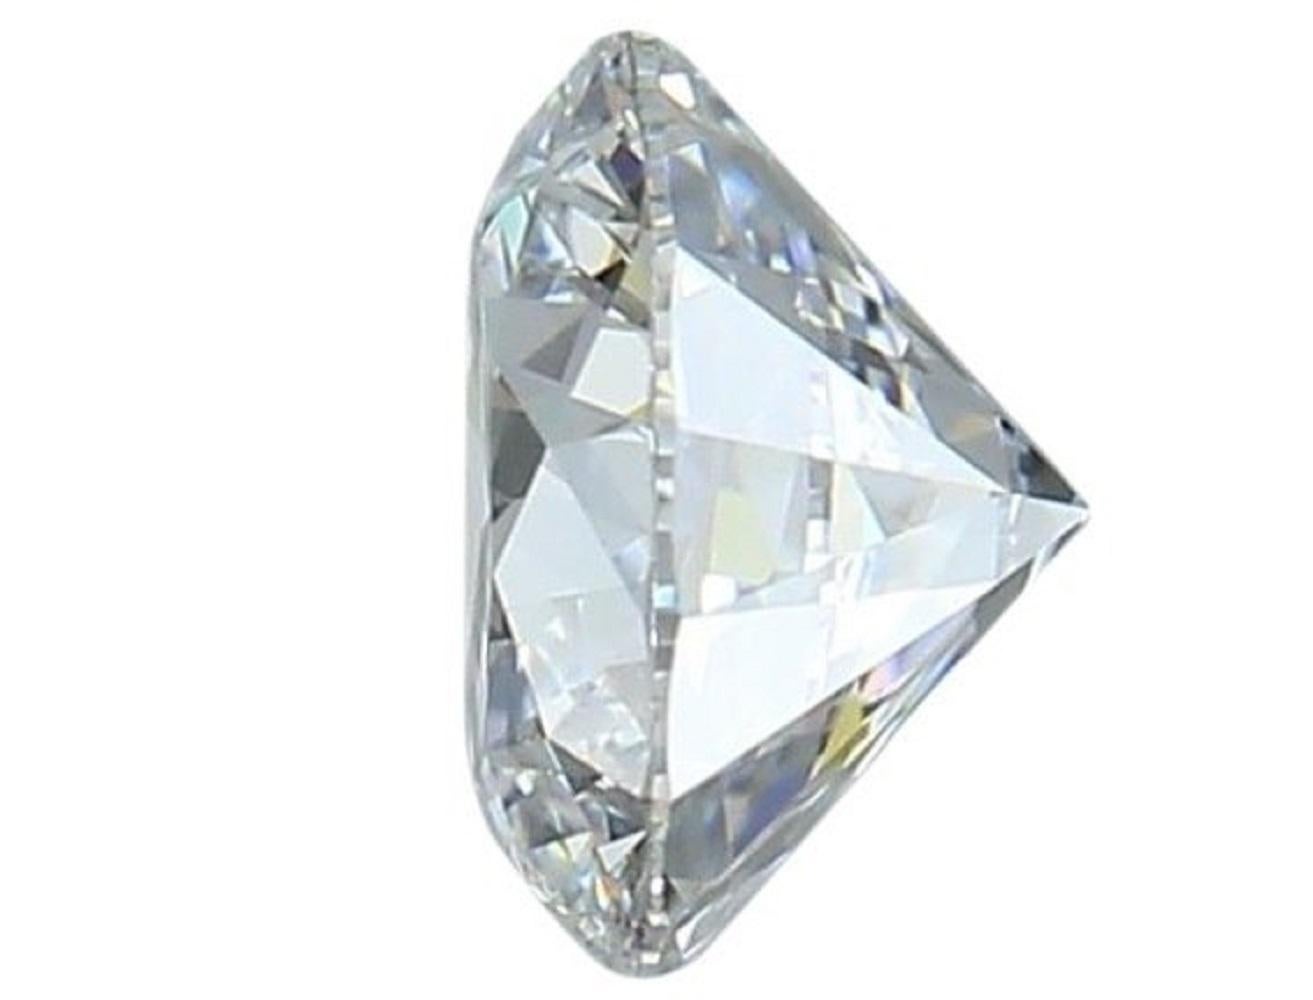 1 sparkling natural round brilliant cut diamond in a 2.34 carat E VVS2 with excellent cut. This diamond comes with IGI Certificate and laser inscription number.

SKU: 172553
IGI 553249159